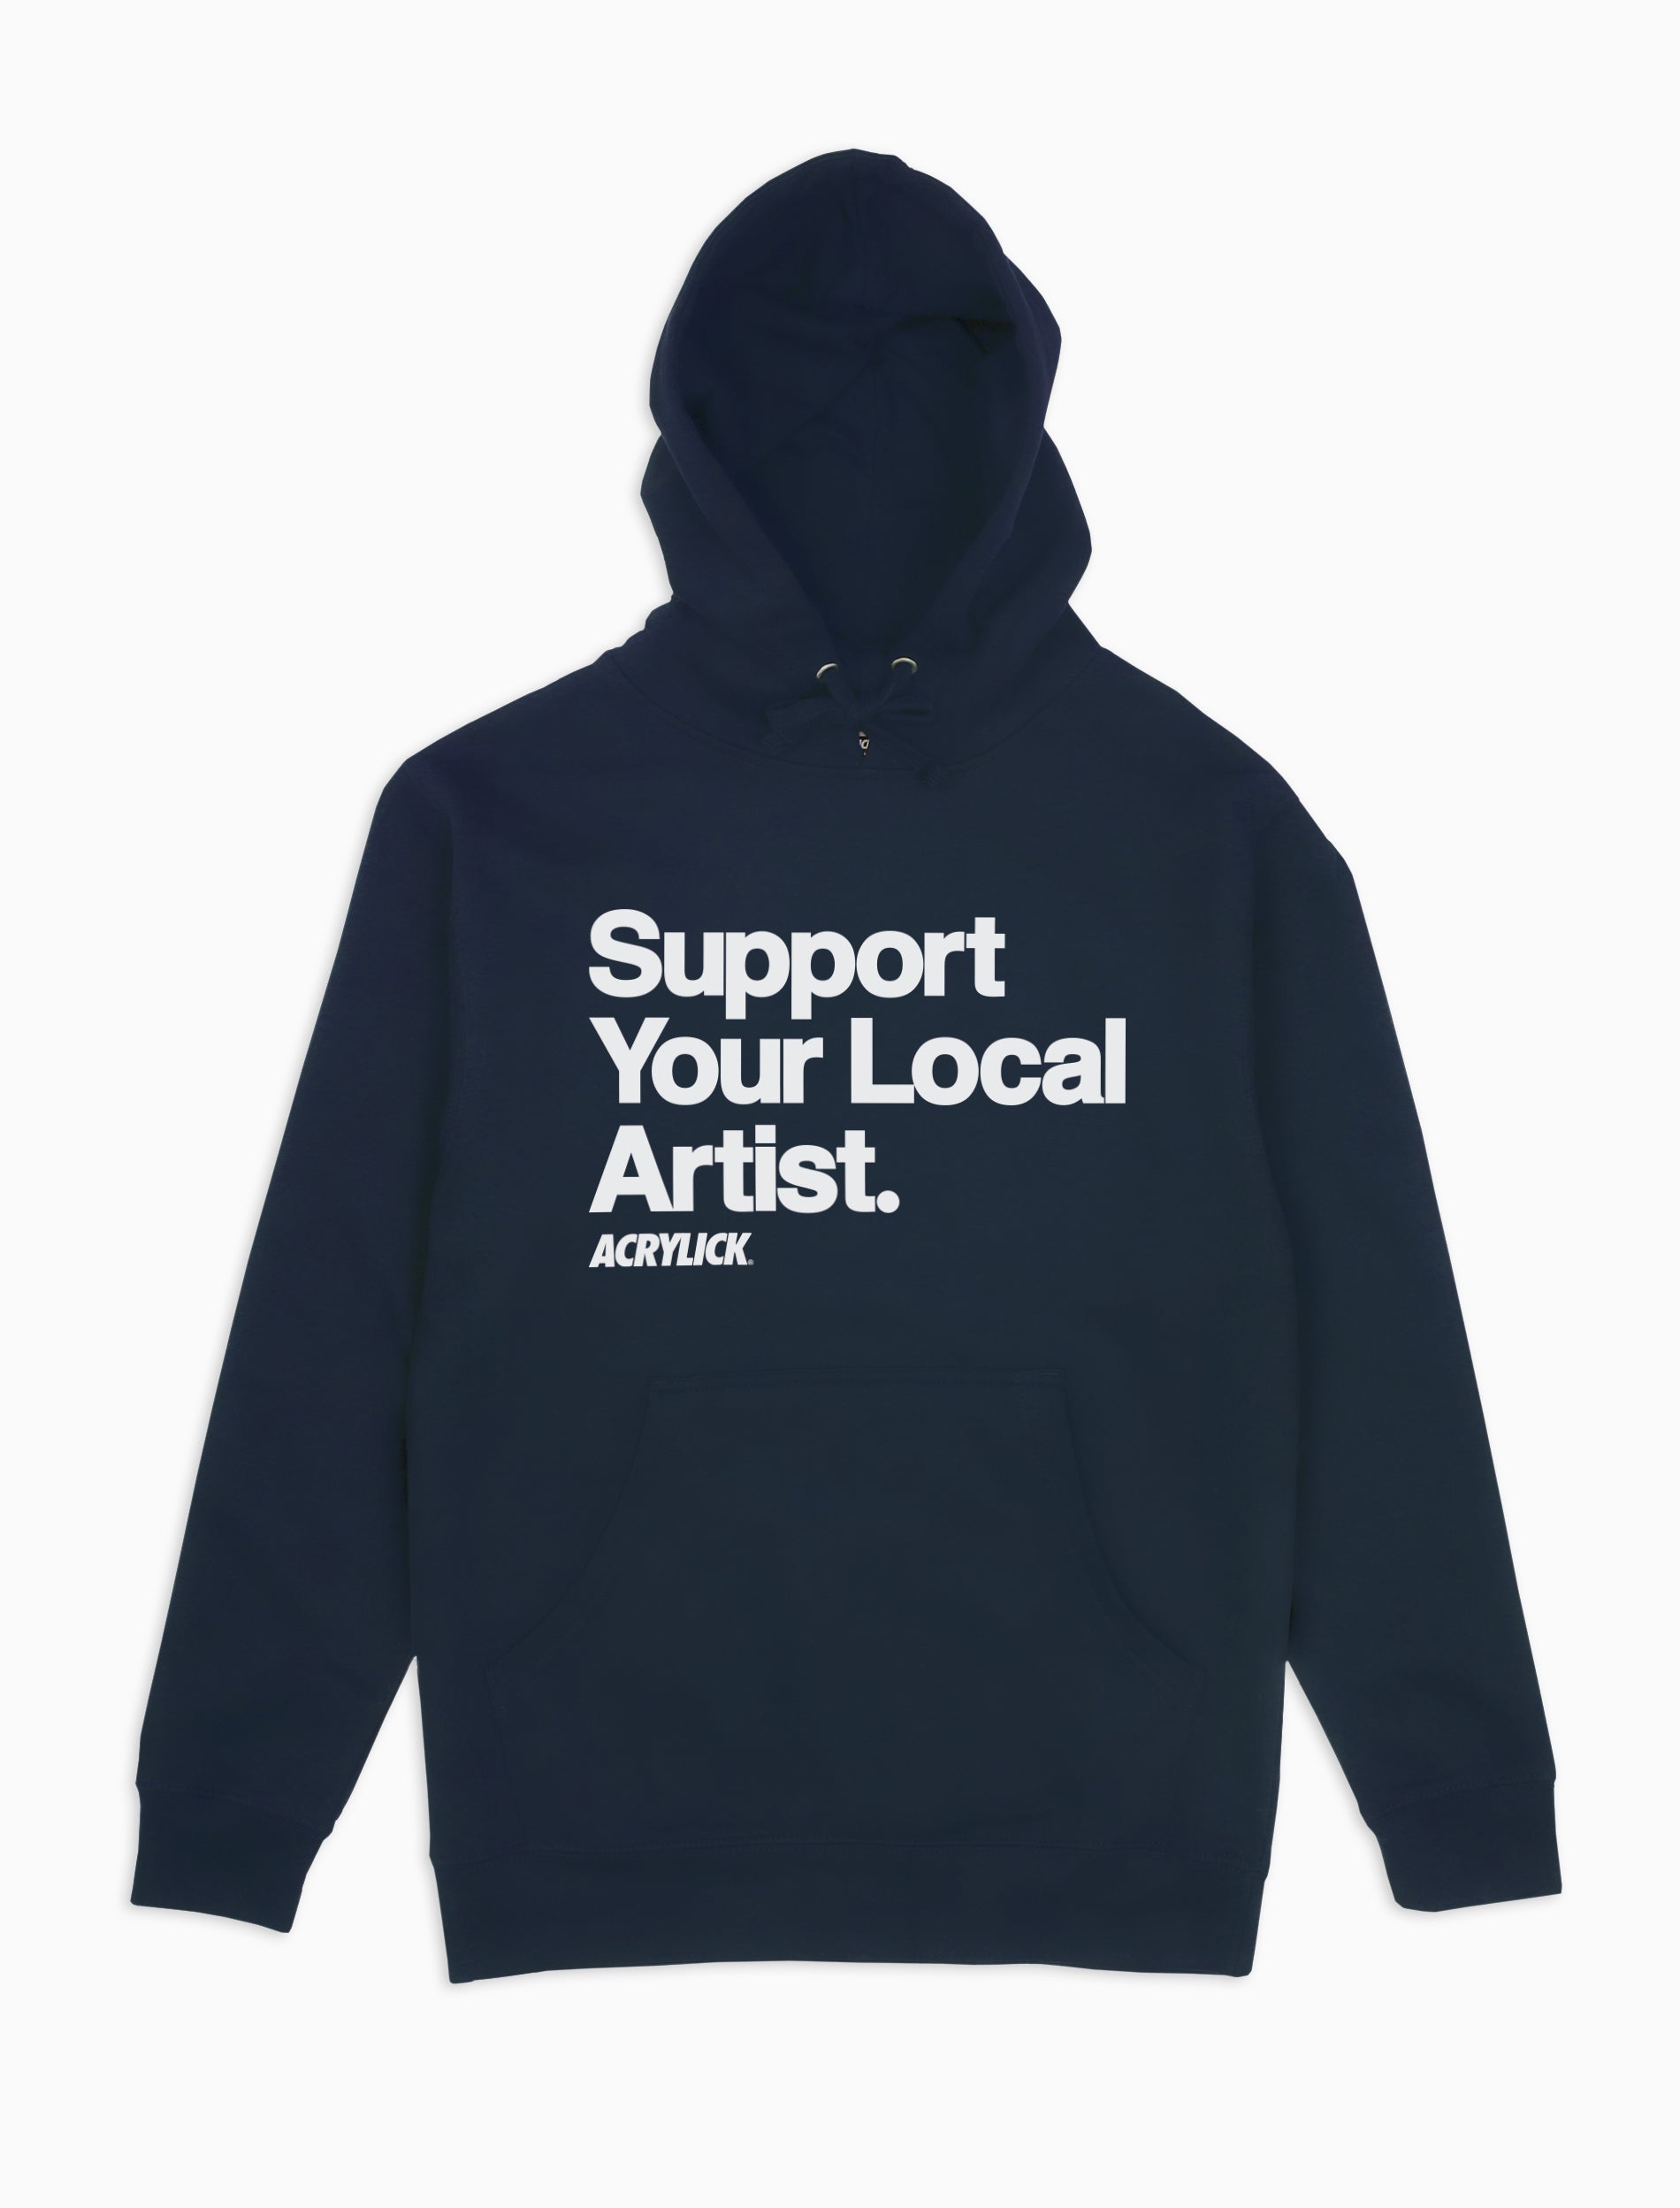 Acrylick Goods - Support Your Local Artist Hoodie - Available in Heather Grey and Navy Hoodies